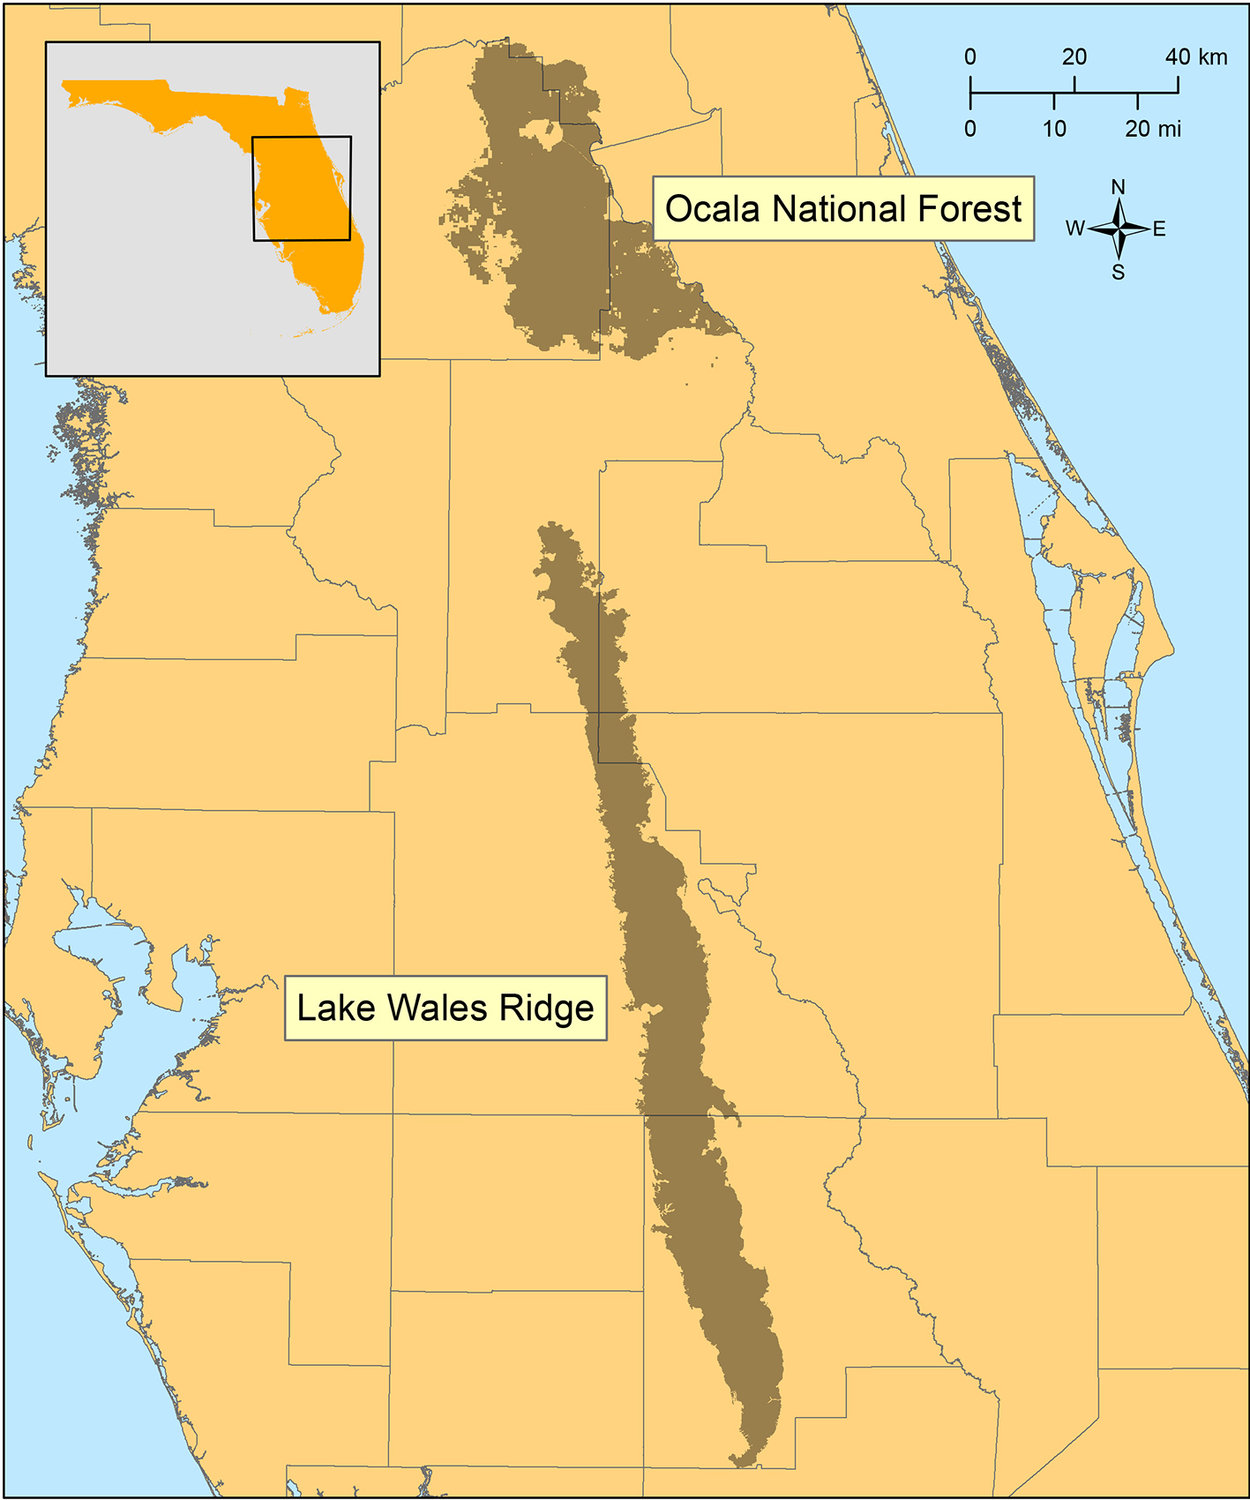 Ocala National Forest is 80 miles north of the bee’s previously known northernmost occurrence on Lake Wales Ridge.